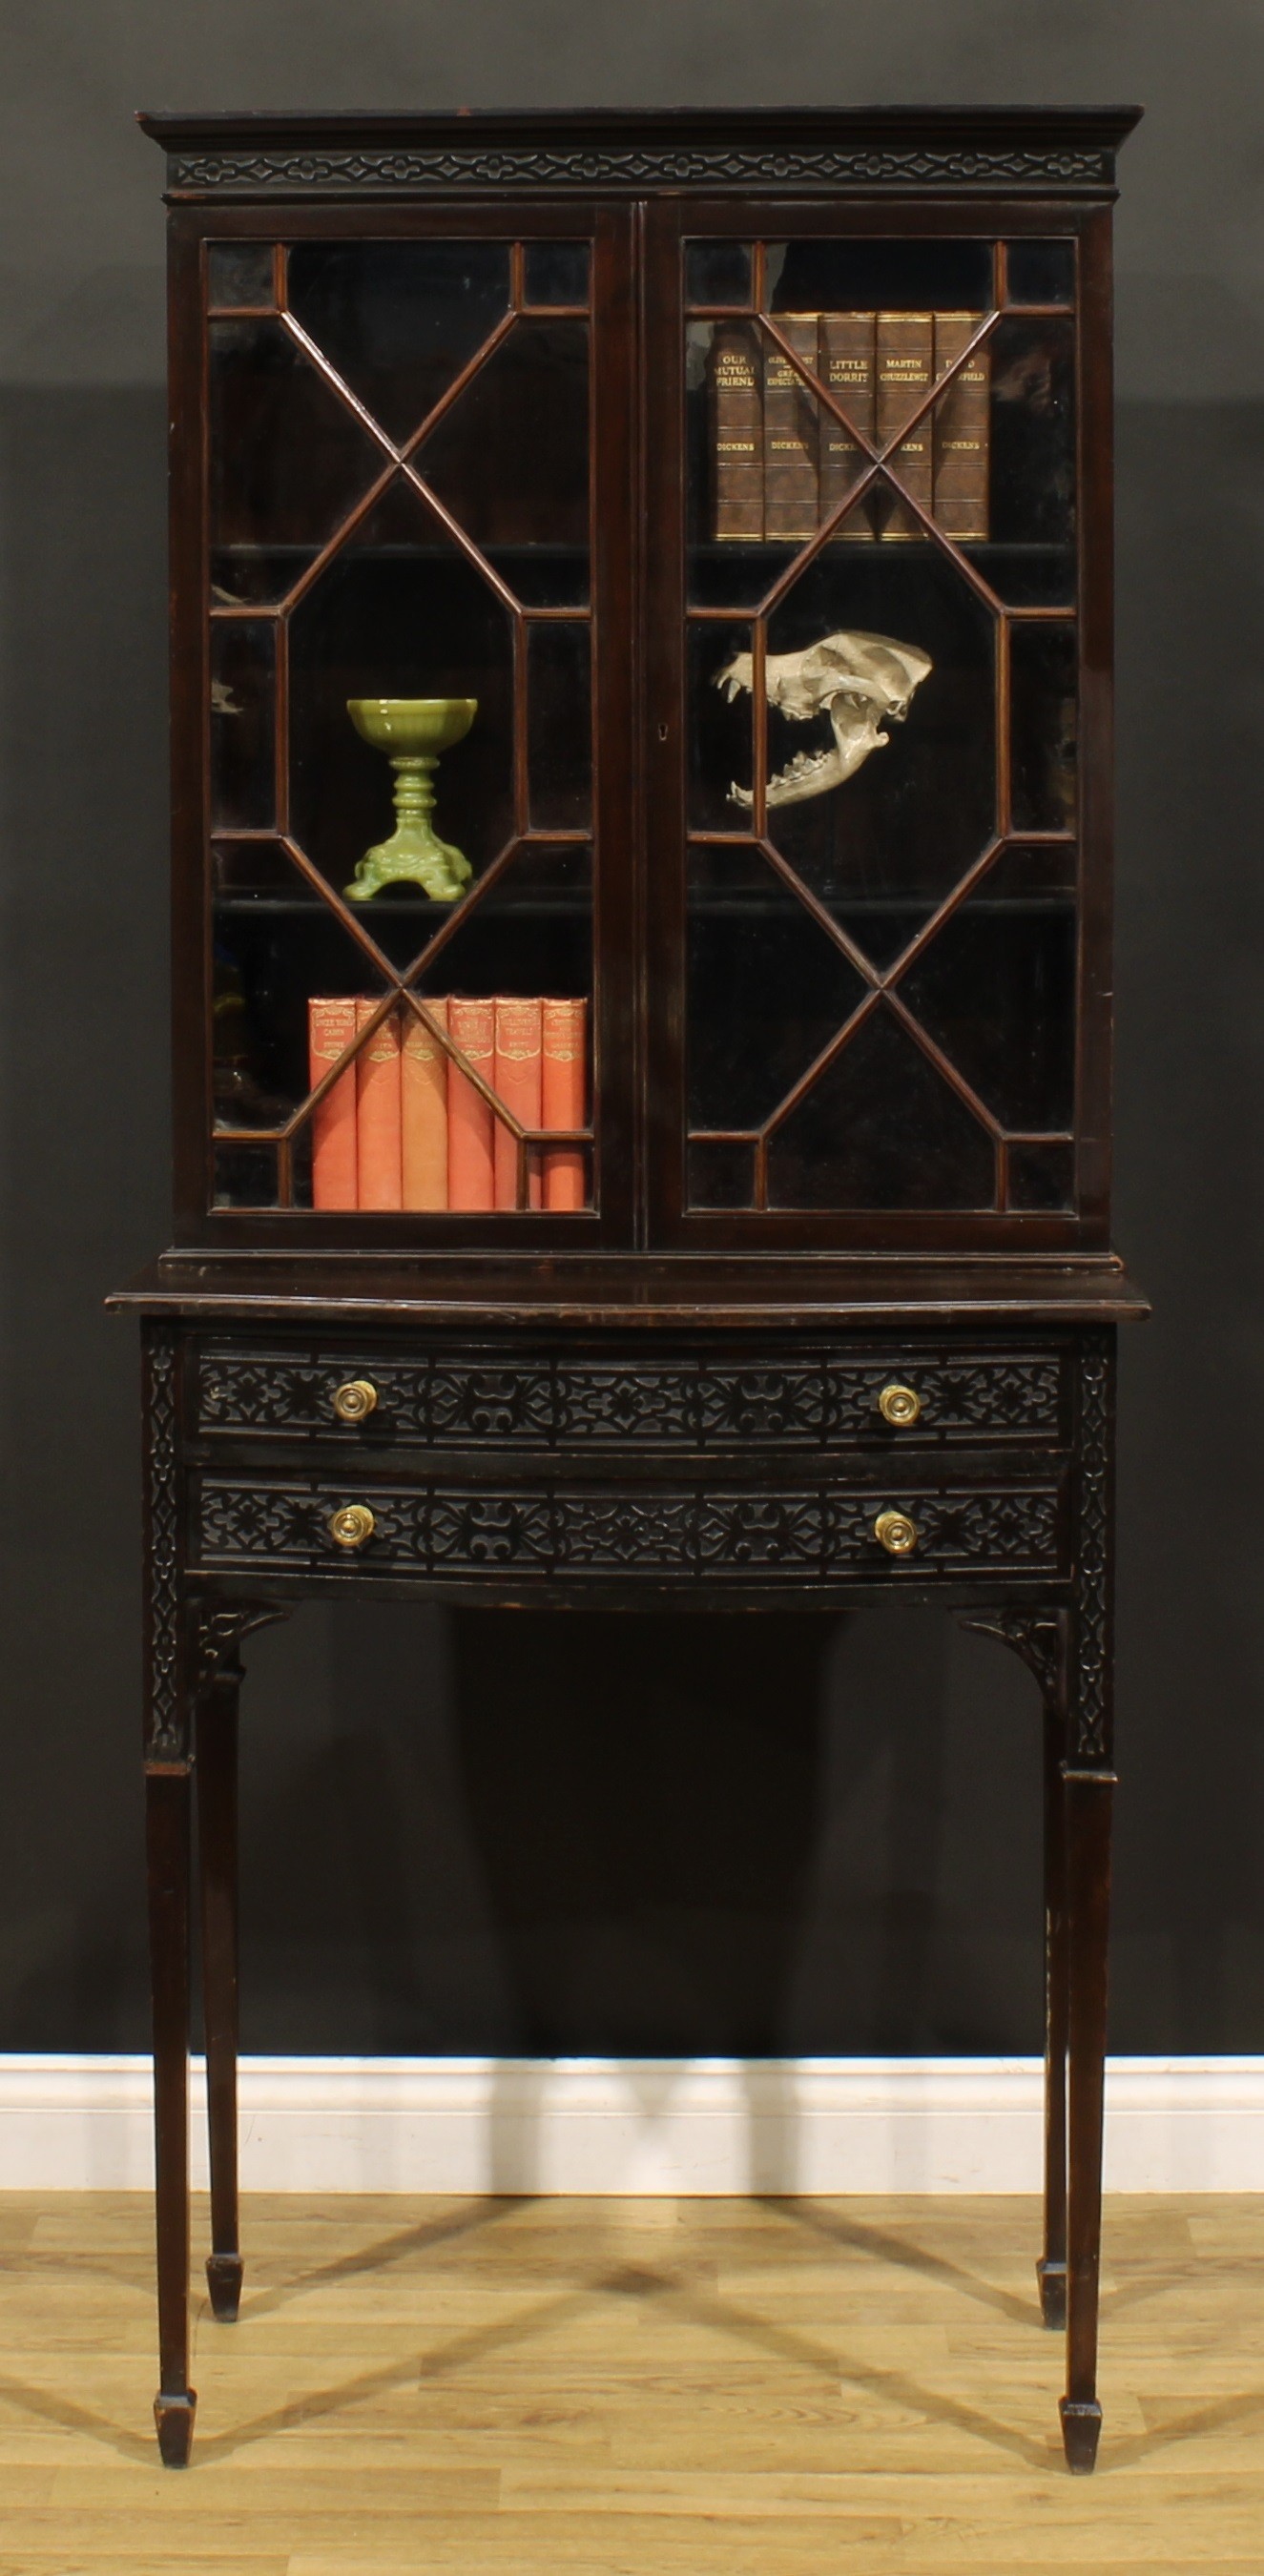 A Chippendale Revival mahogany and blind fretwork library bookcase, moulded cornice above a pair